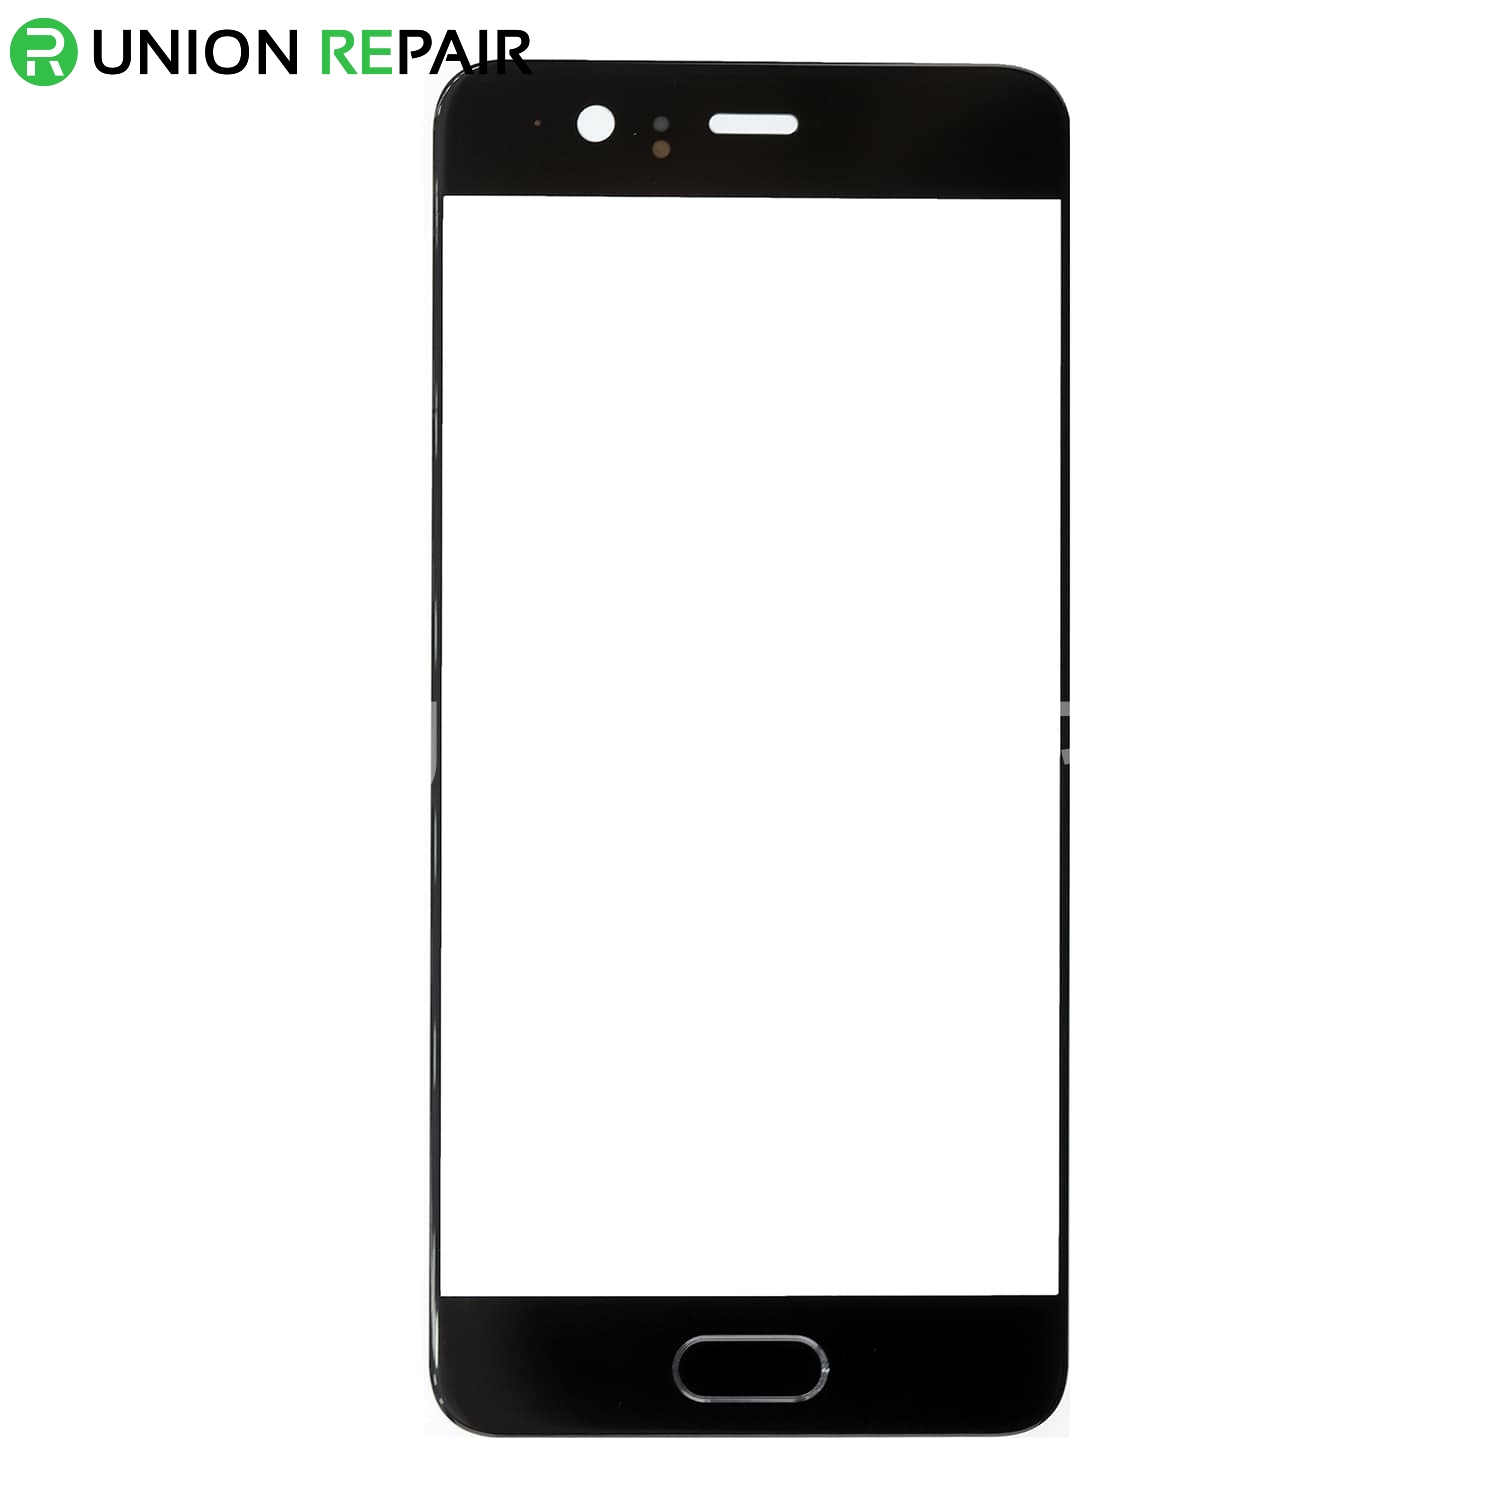 Replacement for Huawei P10 Front Glass Lens - Black